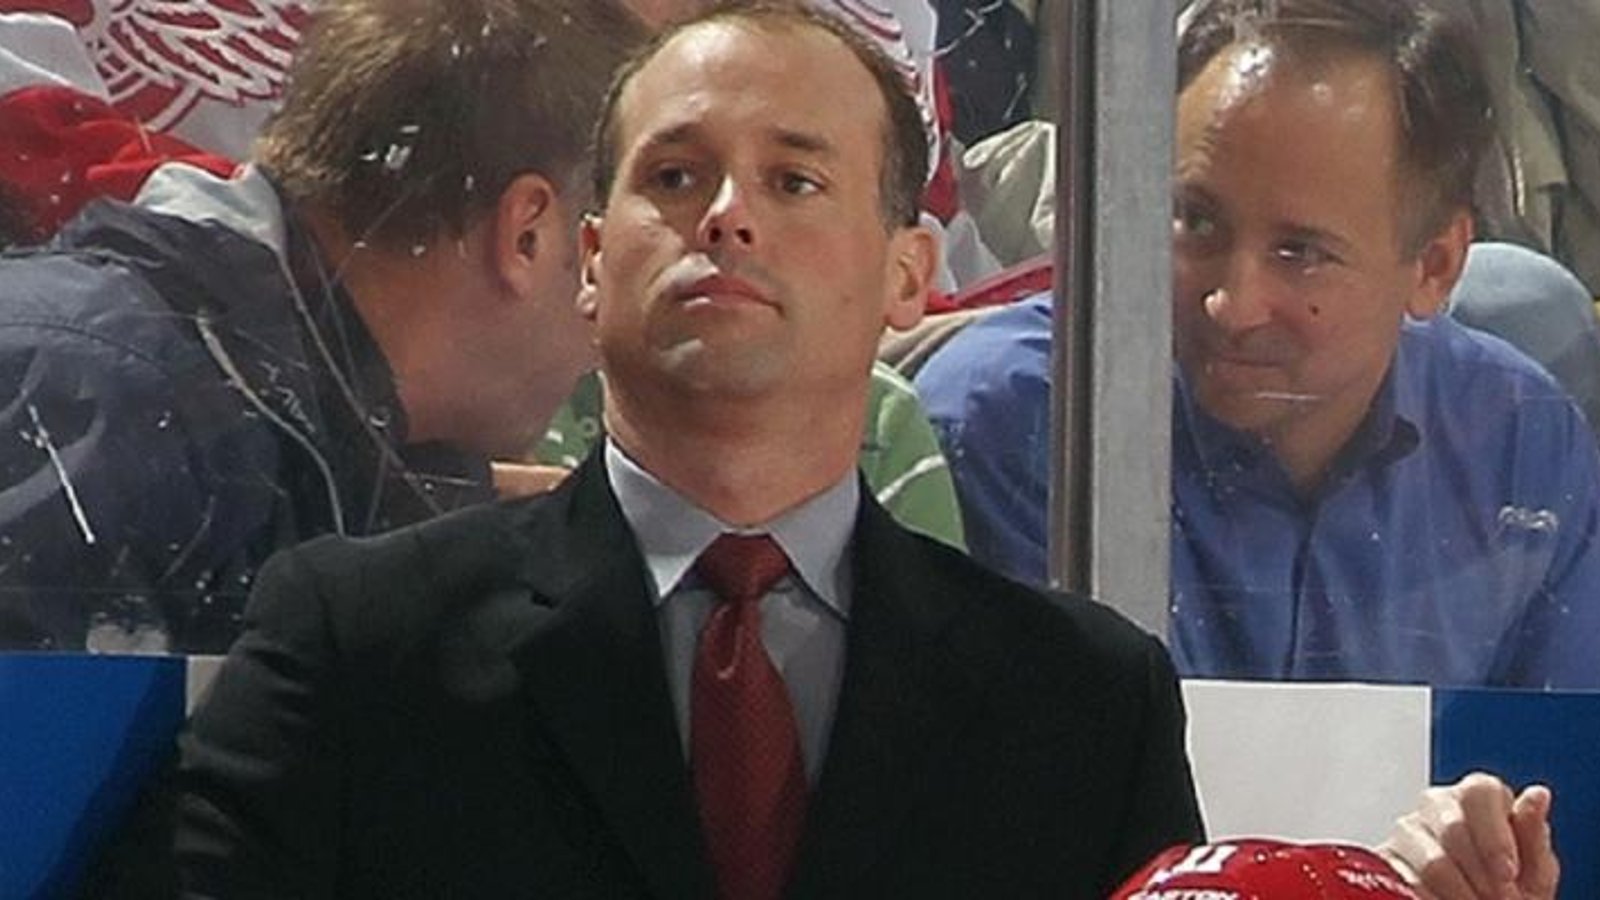 Coach Blashill gets serious after embarrassing loss on Saturday.